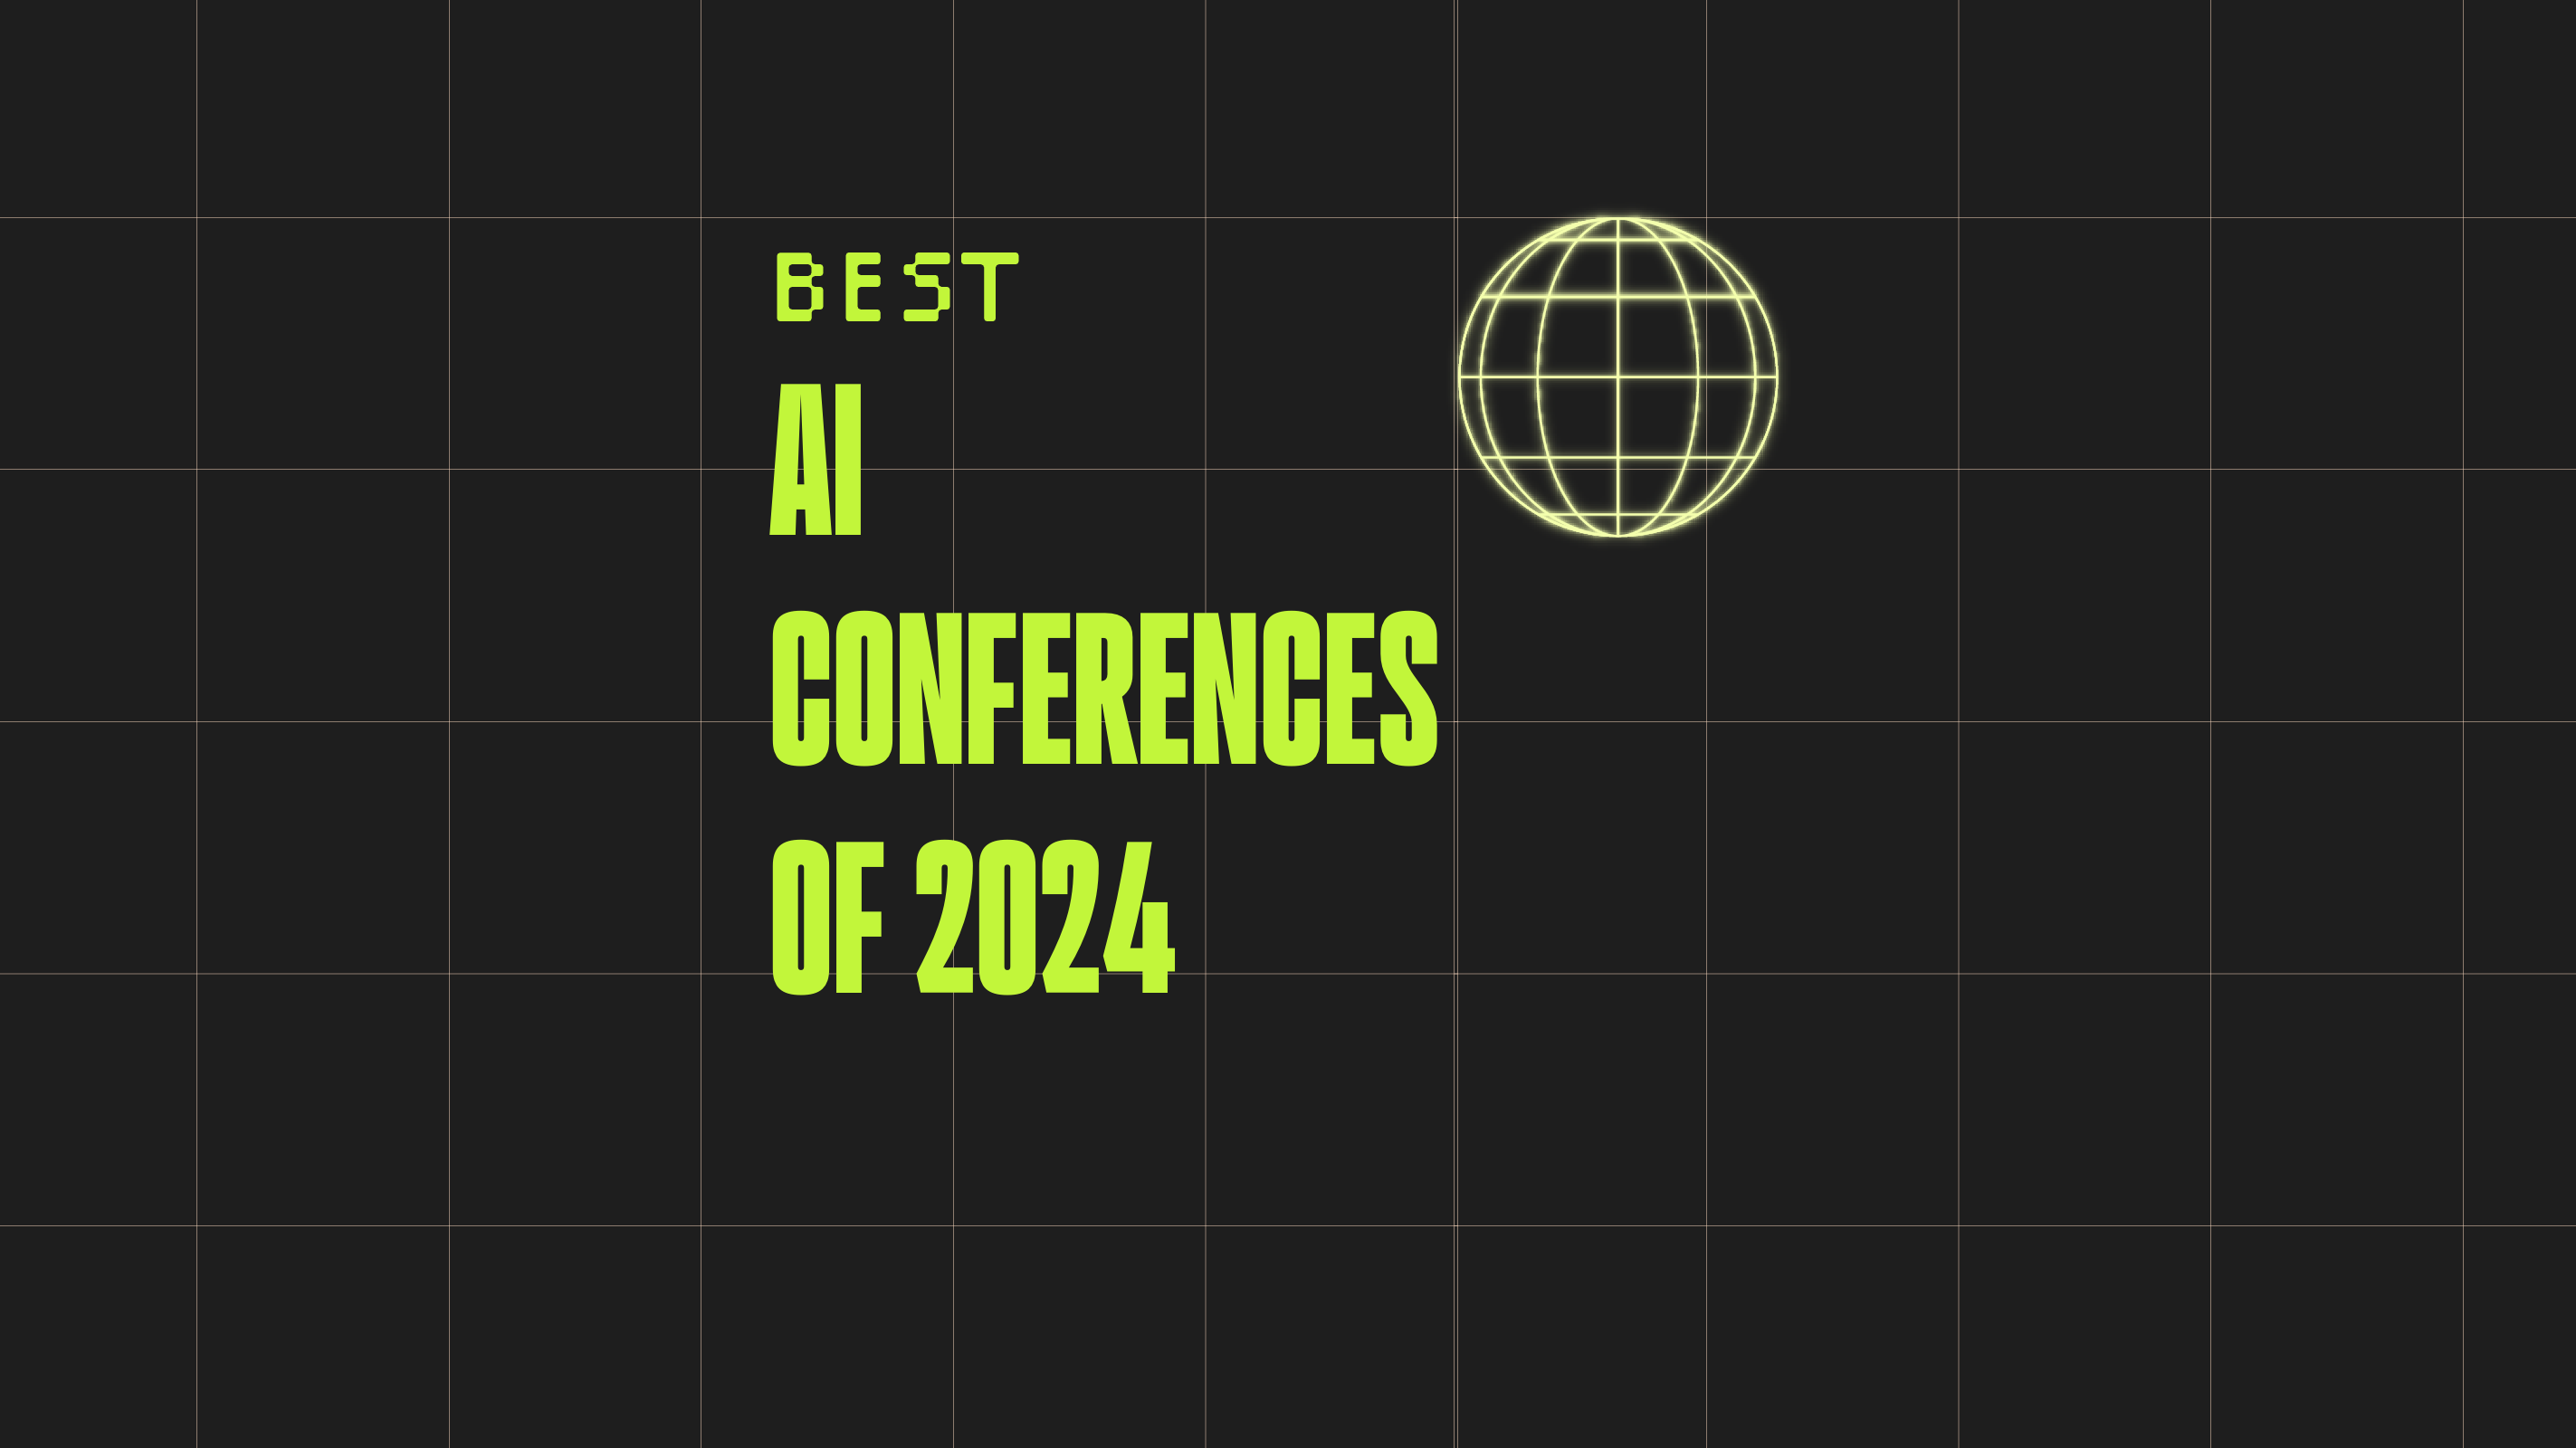 Ai conferences of 2024 best events